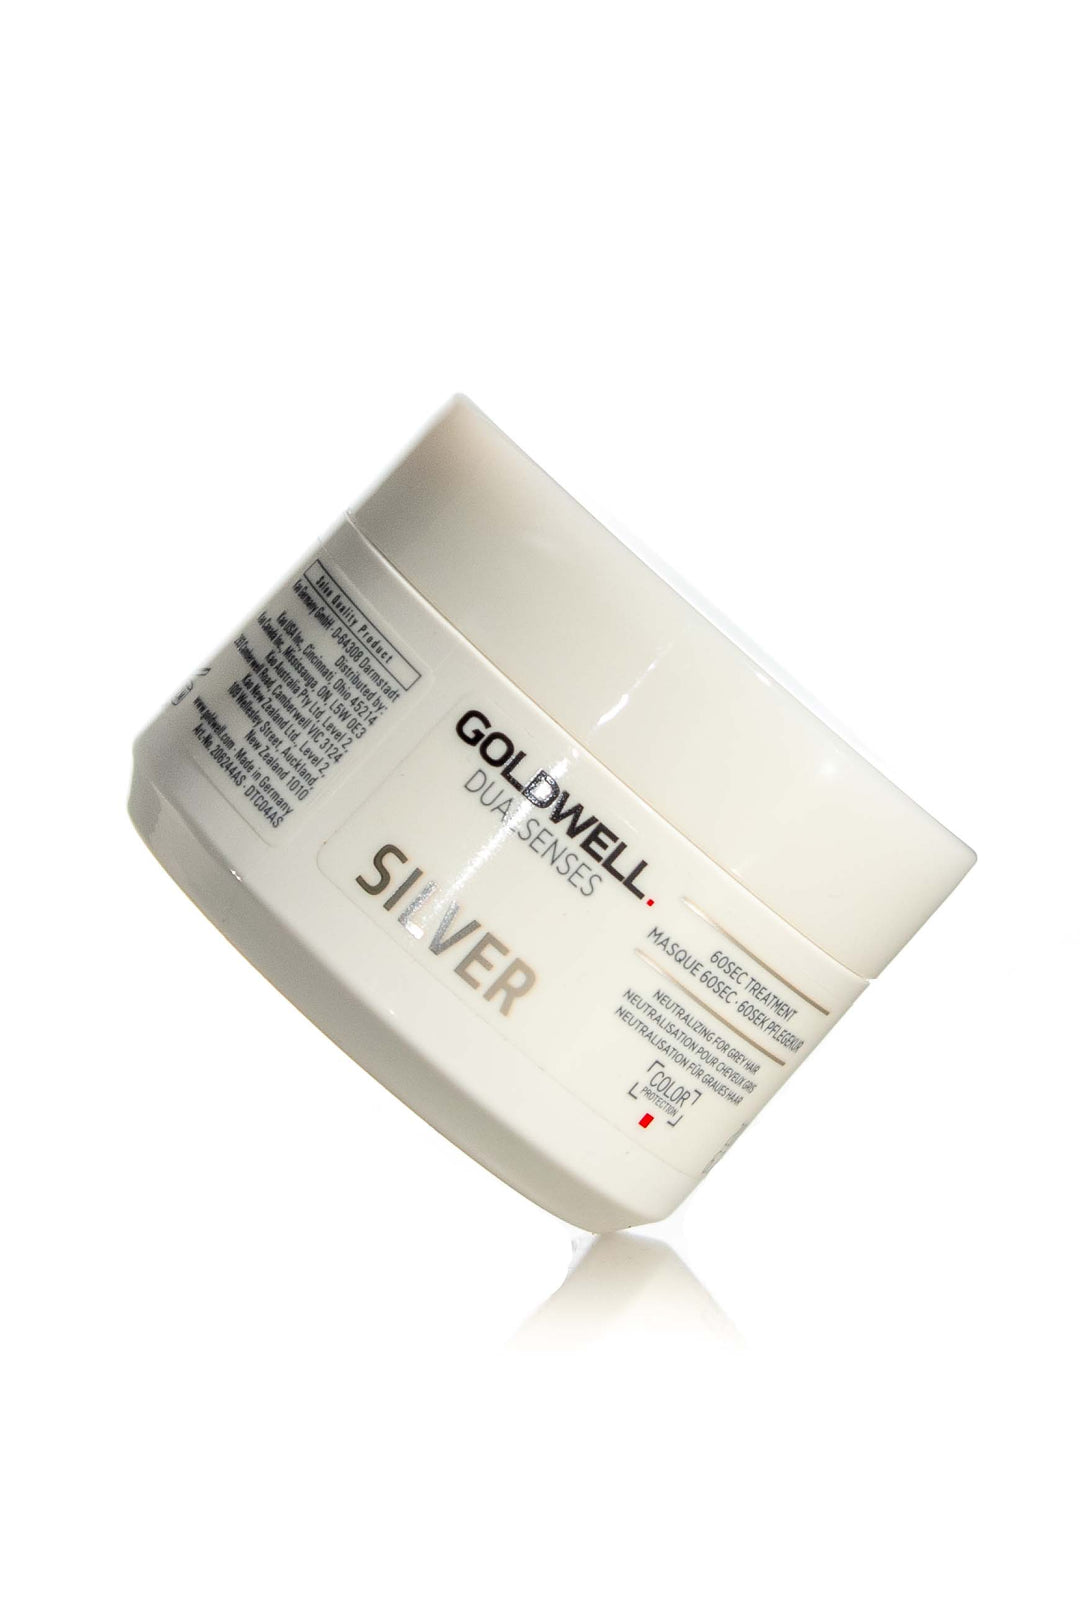 goldwell silver 60 second treatment